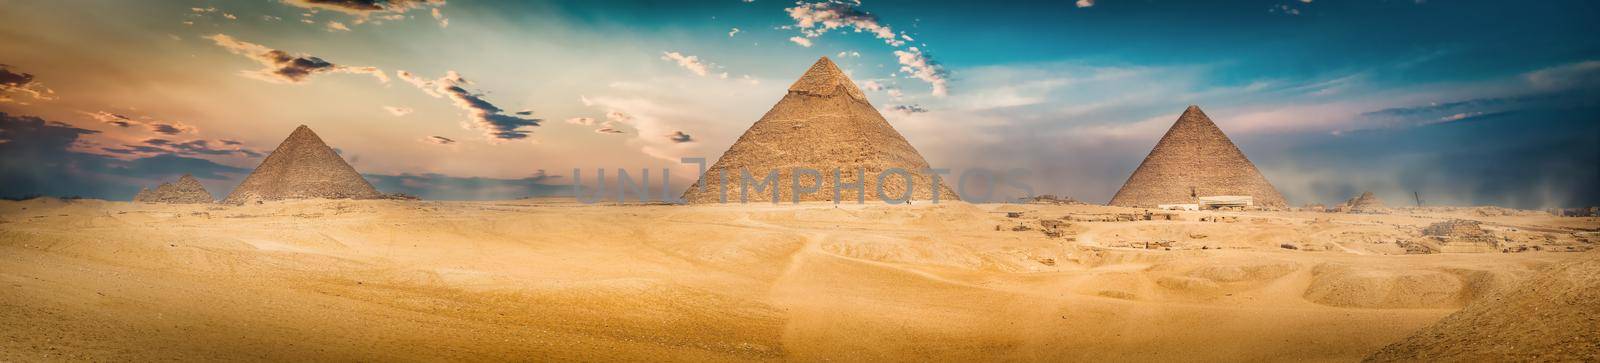 Three pyramids in the desert by Givaga